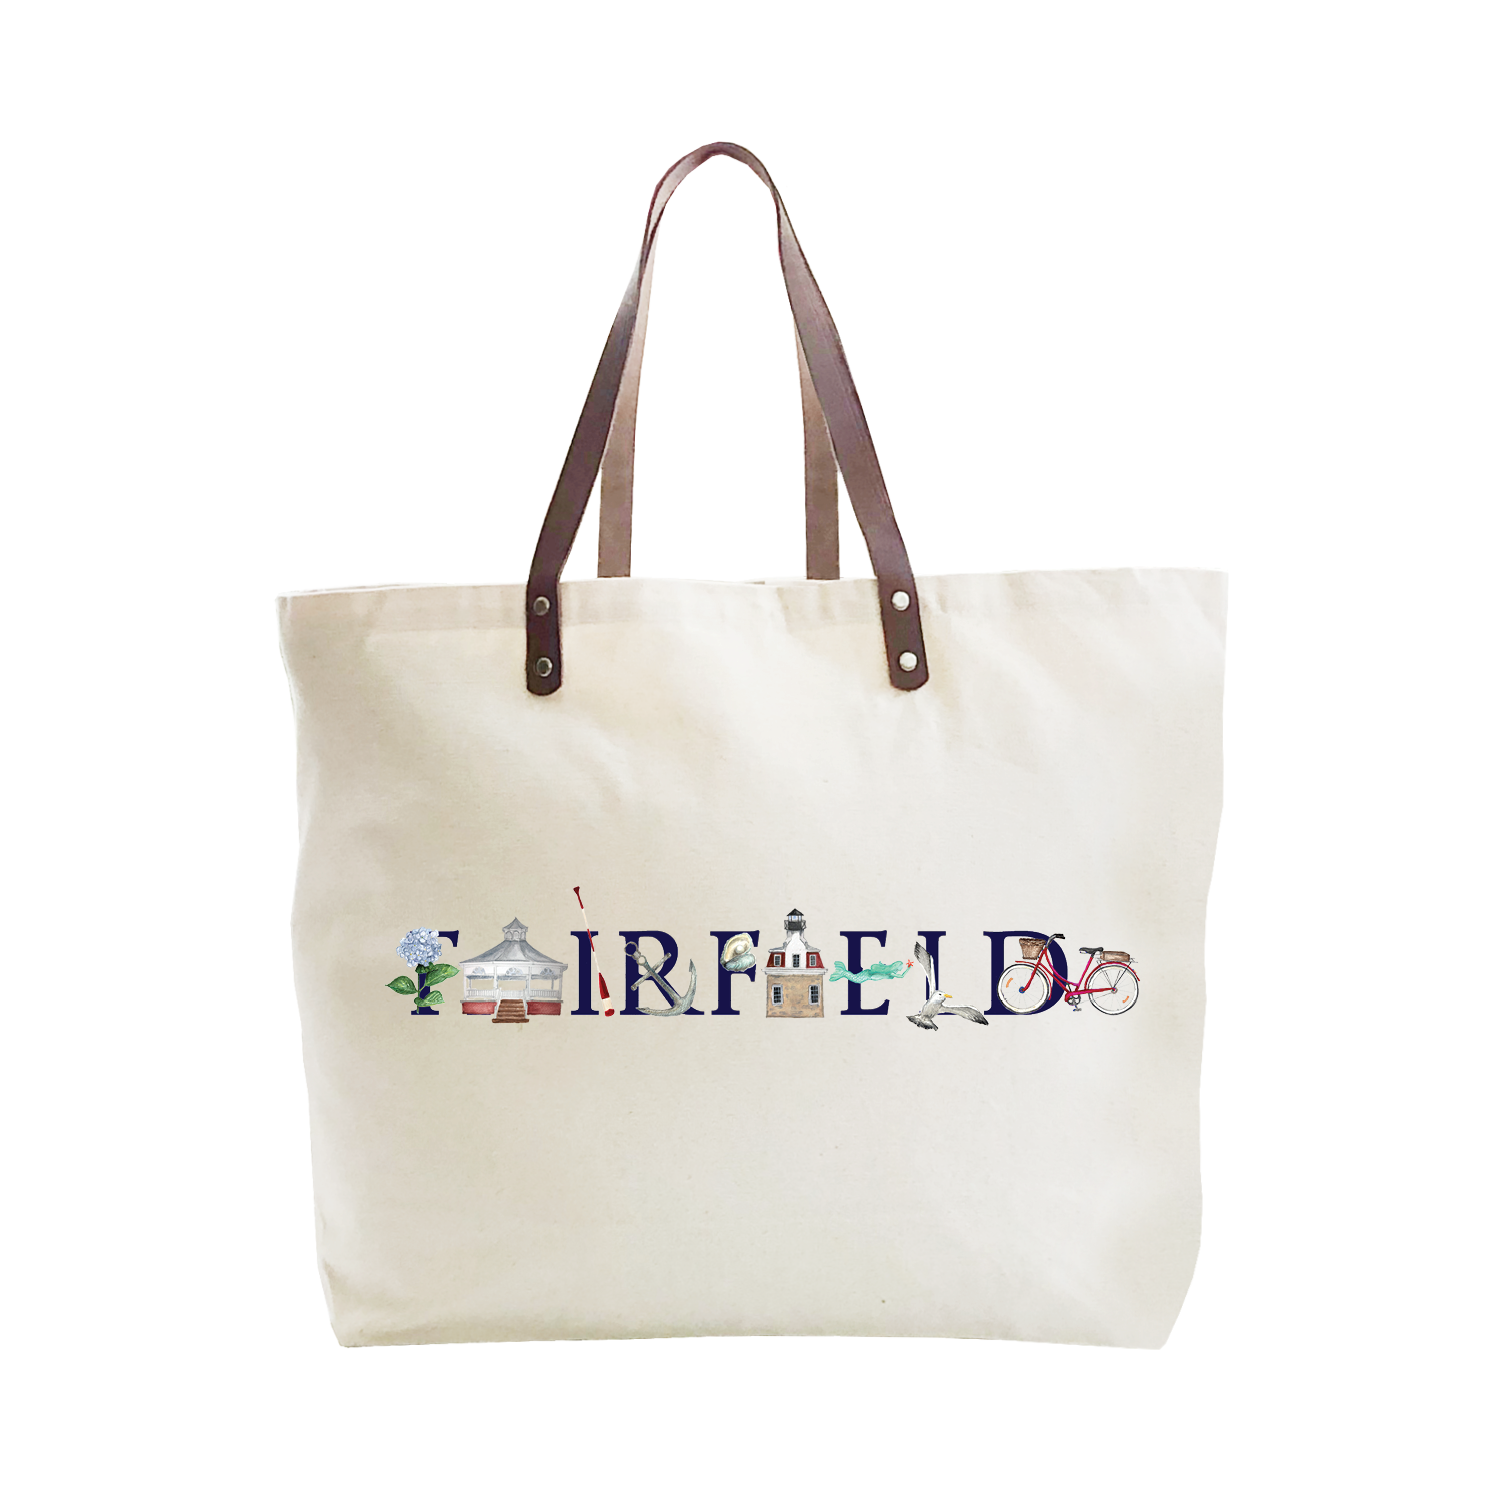 fairfield ct large tote